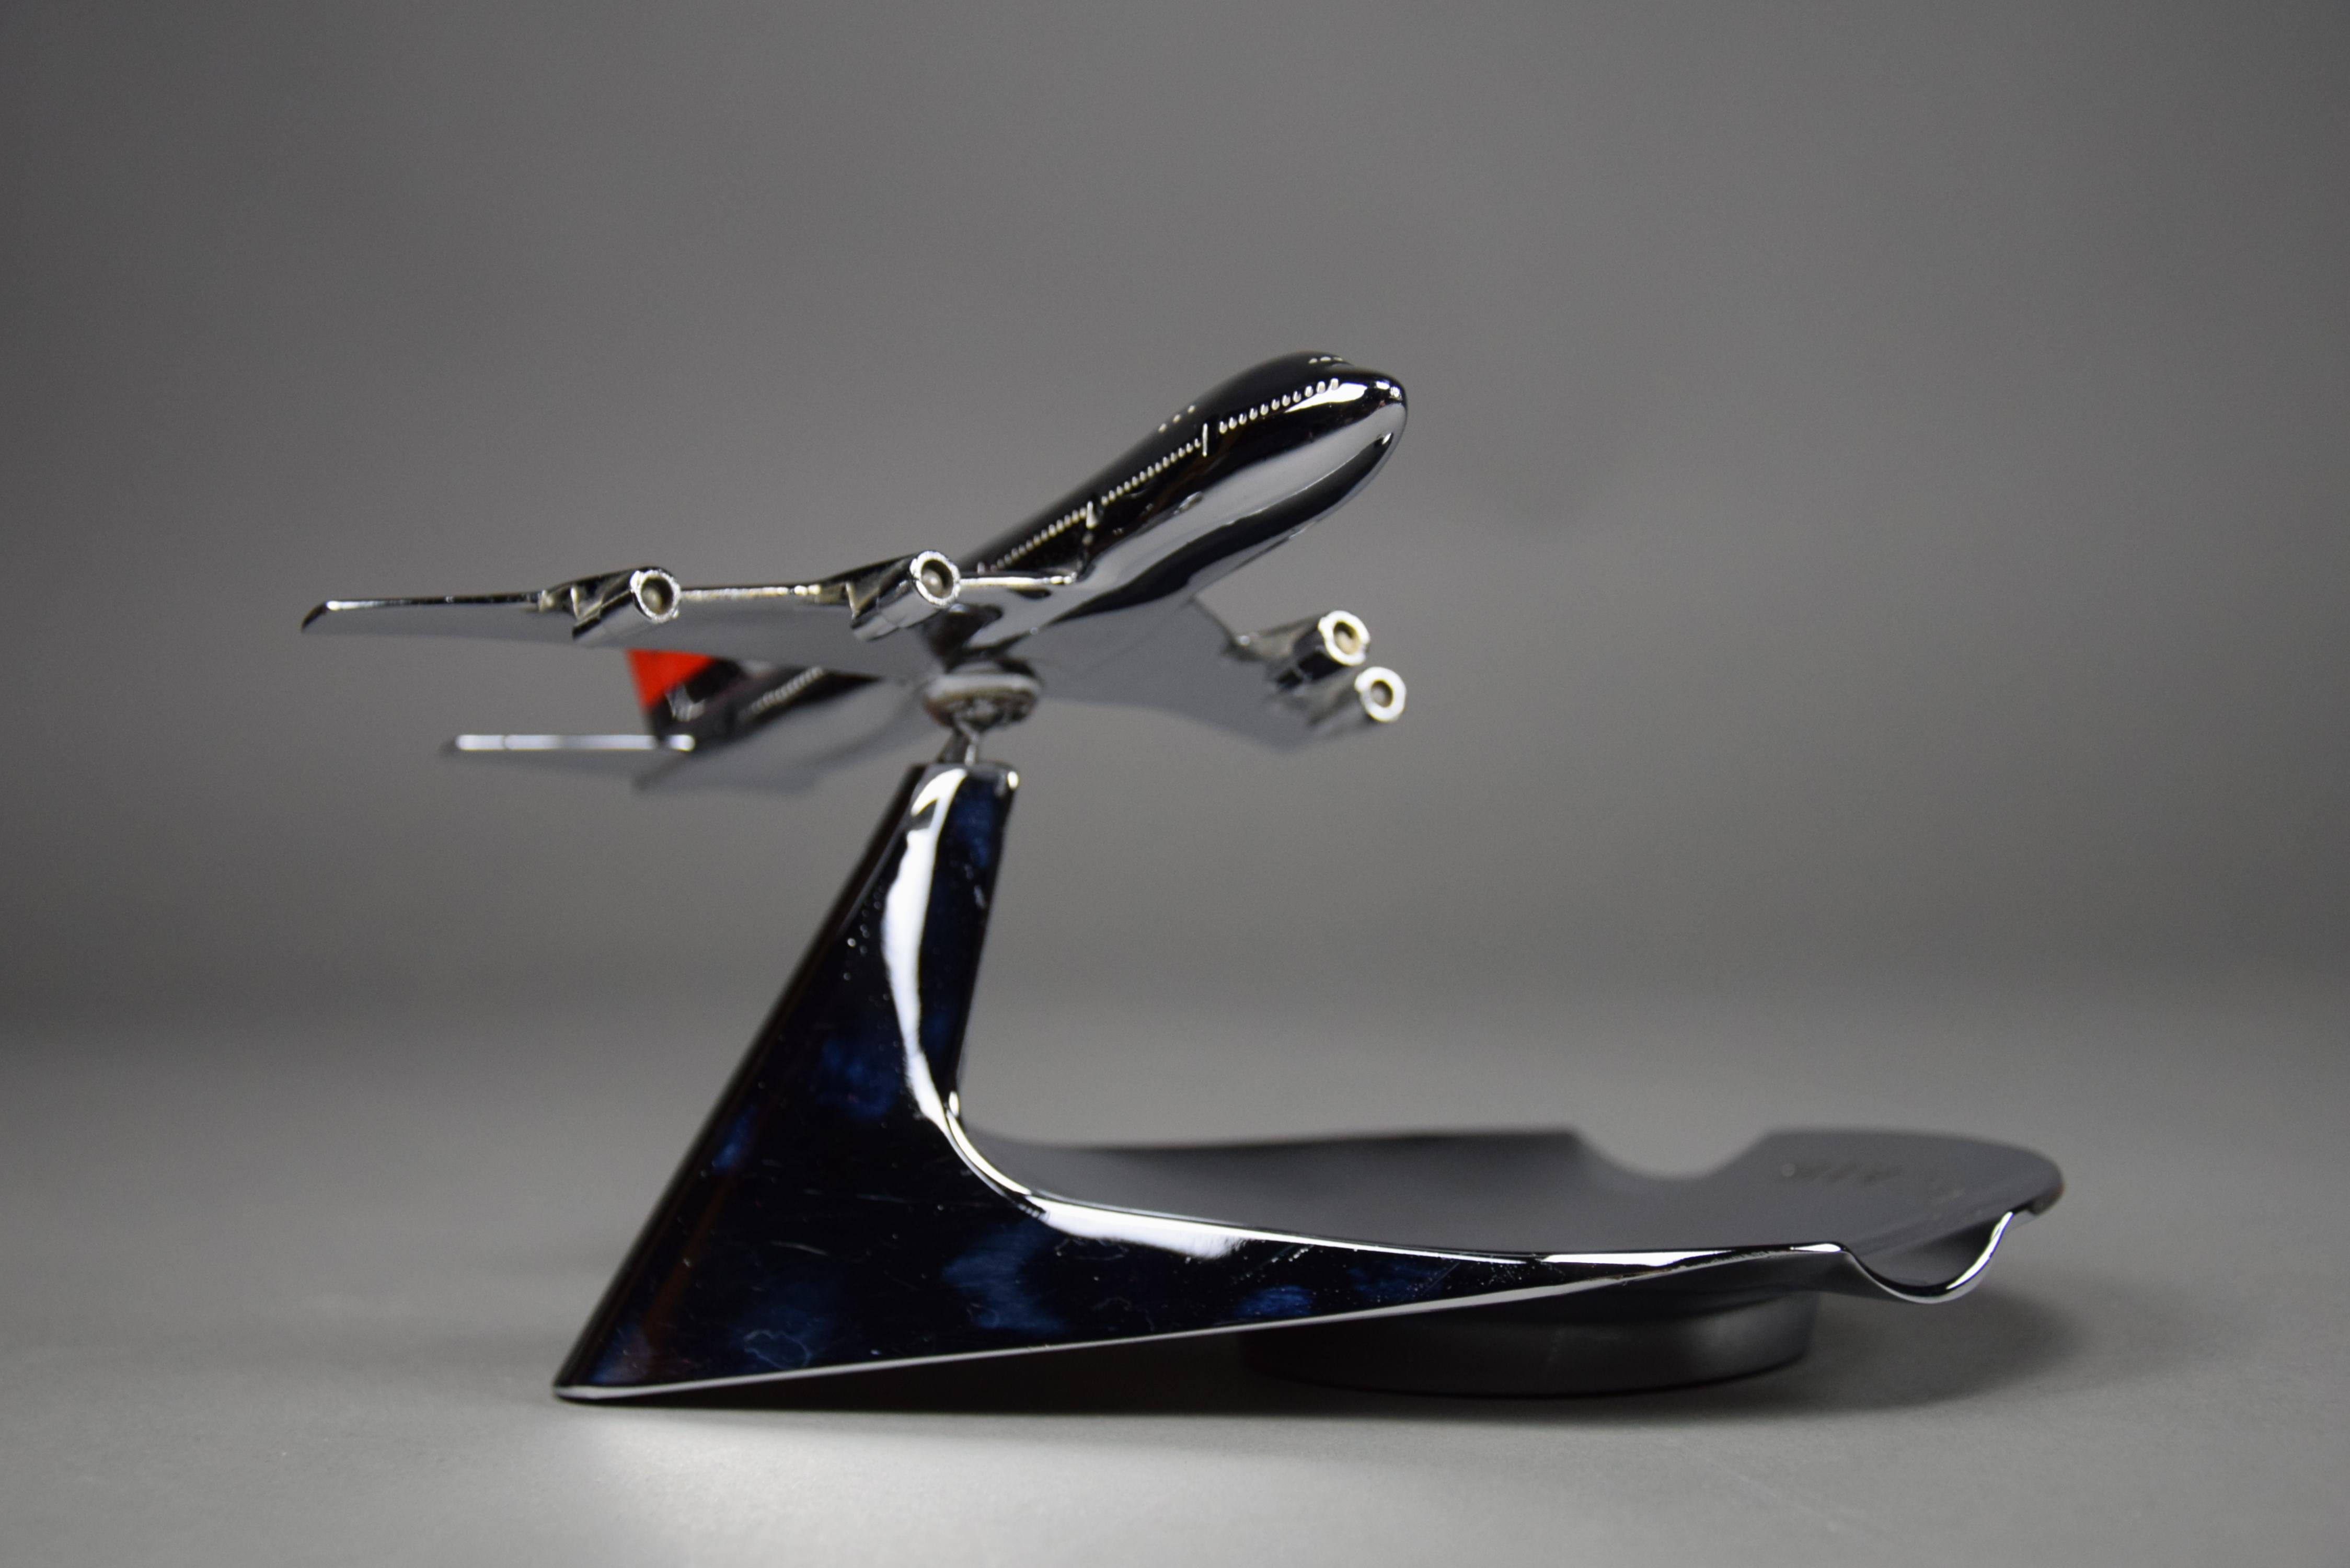 Presenting the Ultimate Collectible: Rare Mid-Century Modern Swiss Air Ashtray with a Boeing 747 Model!

Imagine owning a piece of aviation history and mid-century modern design rolled into one exquisite item. Behold the rare chrome-plated Swiss Air